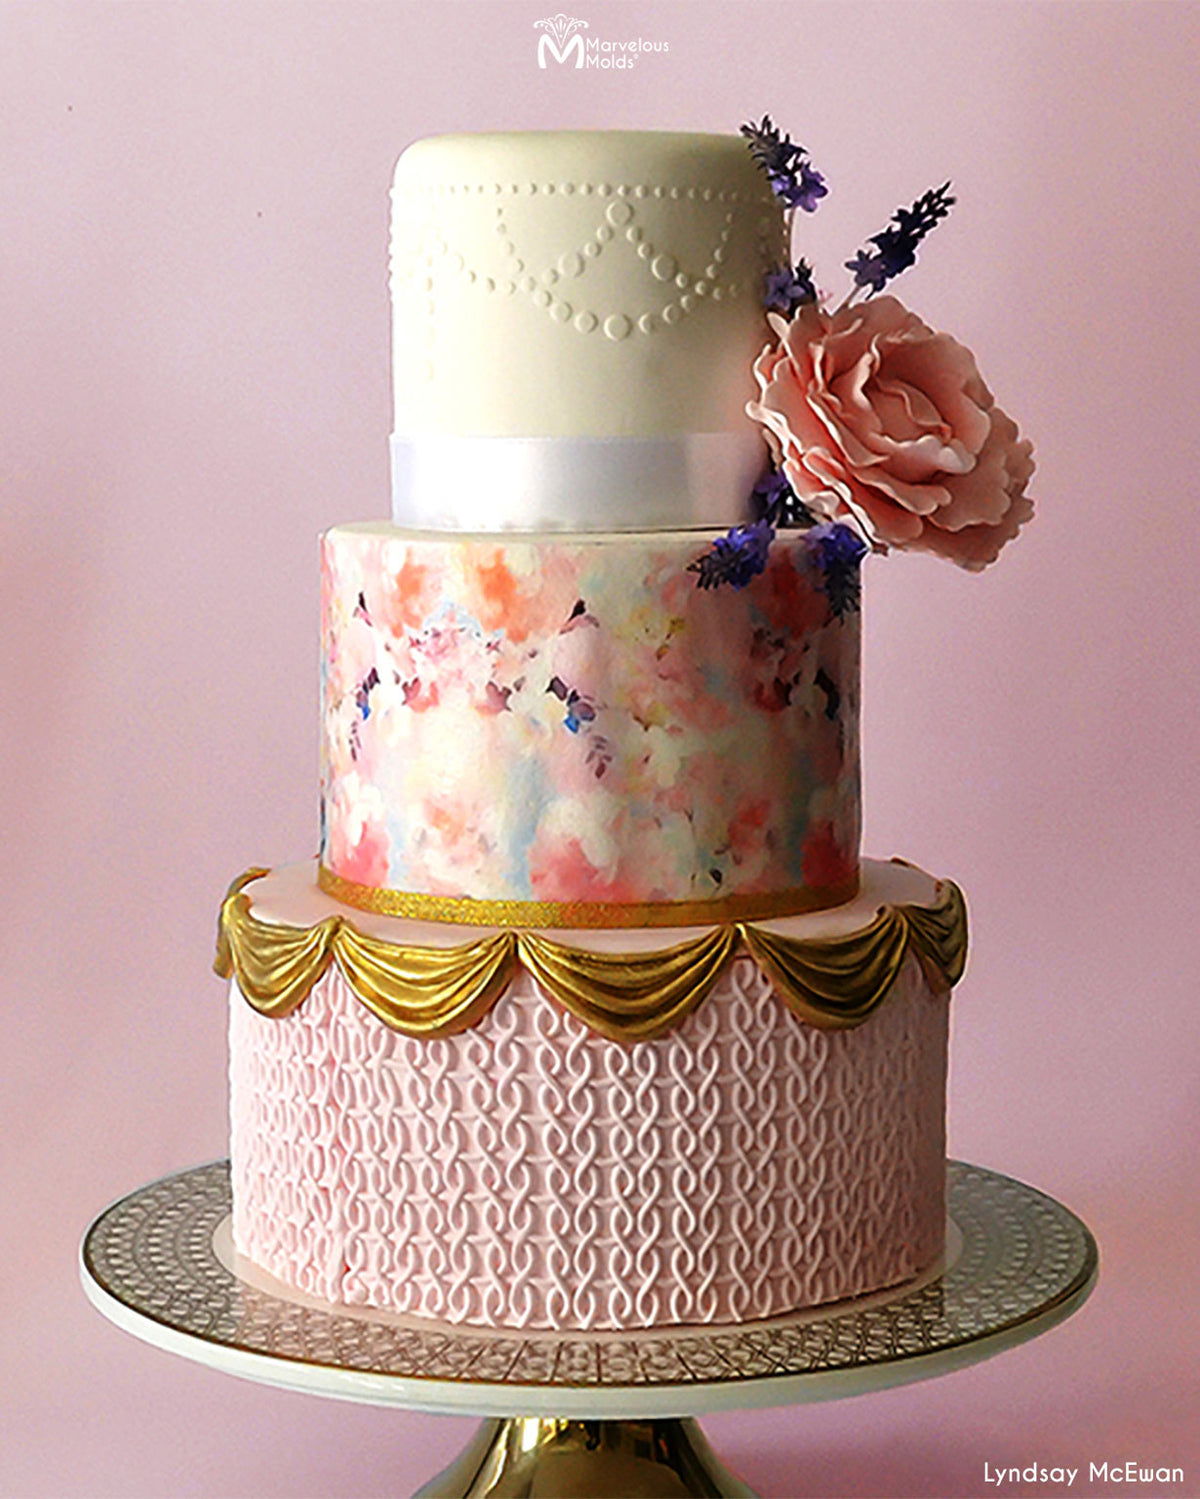 Pink Watercolor Cake with Gold Swag Border Detail Created Using the Marvelous Molds Large Classic Swag